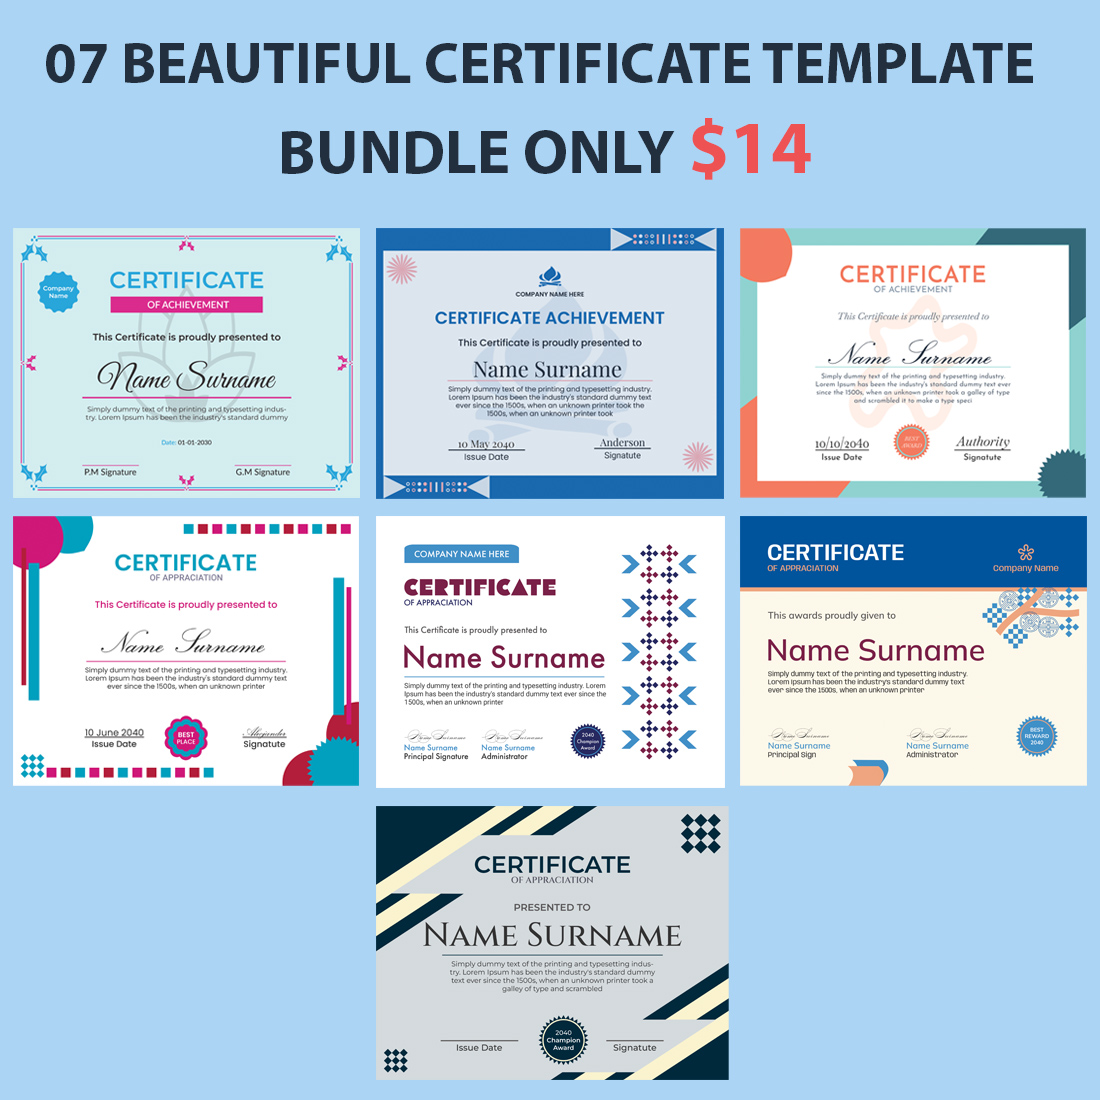 07 BEAUTIFUL CERTIFICATE TEMPLATE BUNDLE ONLY $14 cover image.